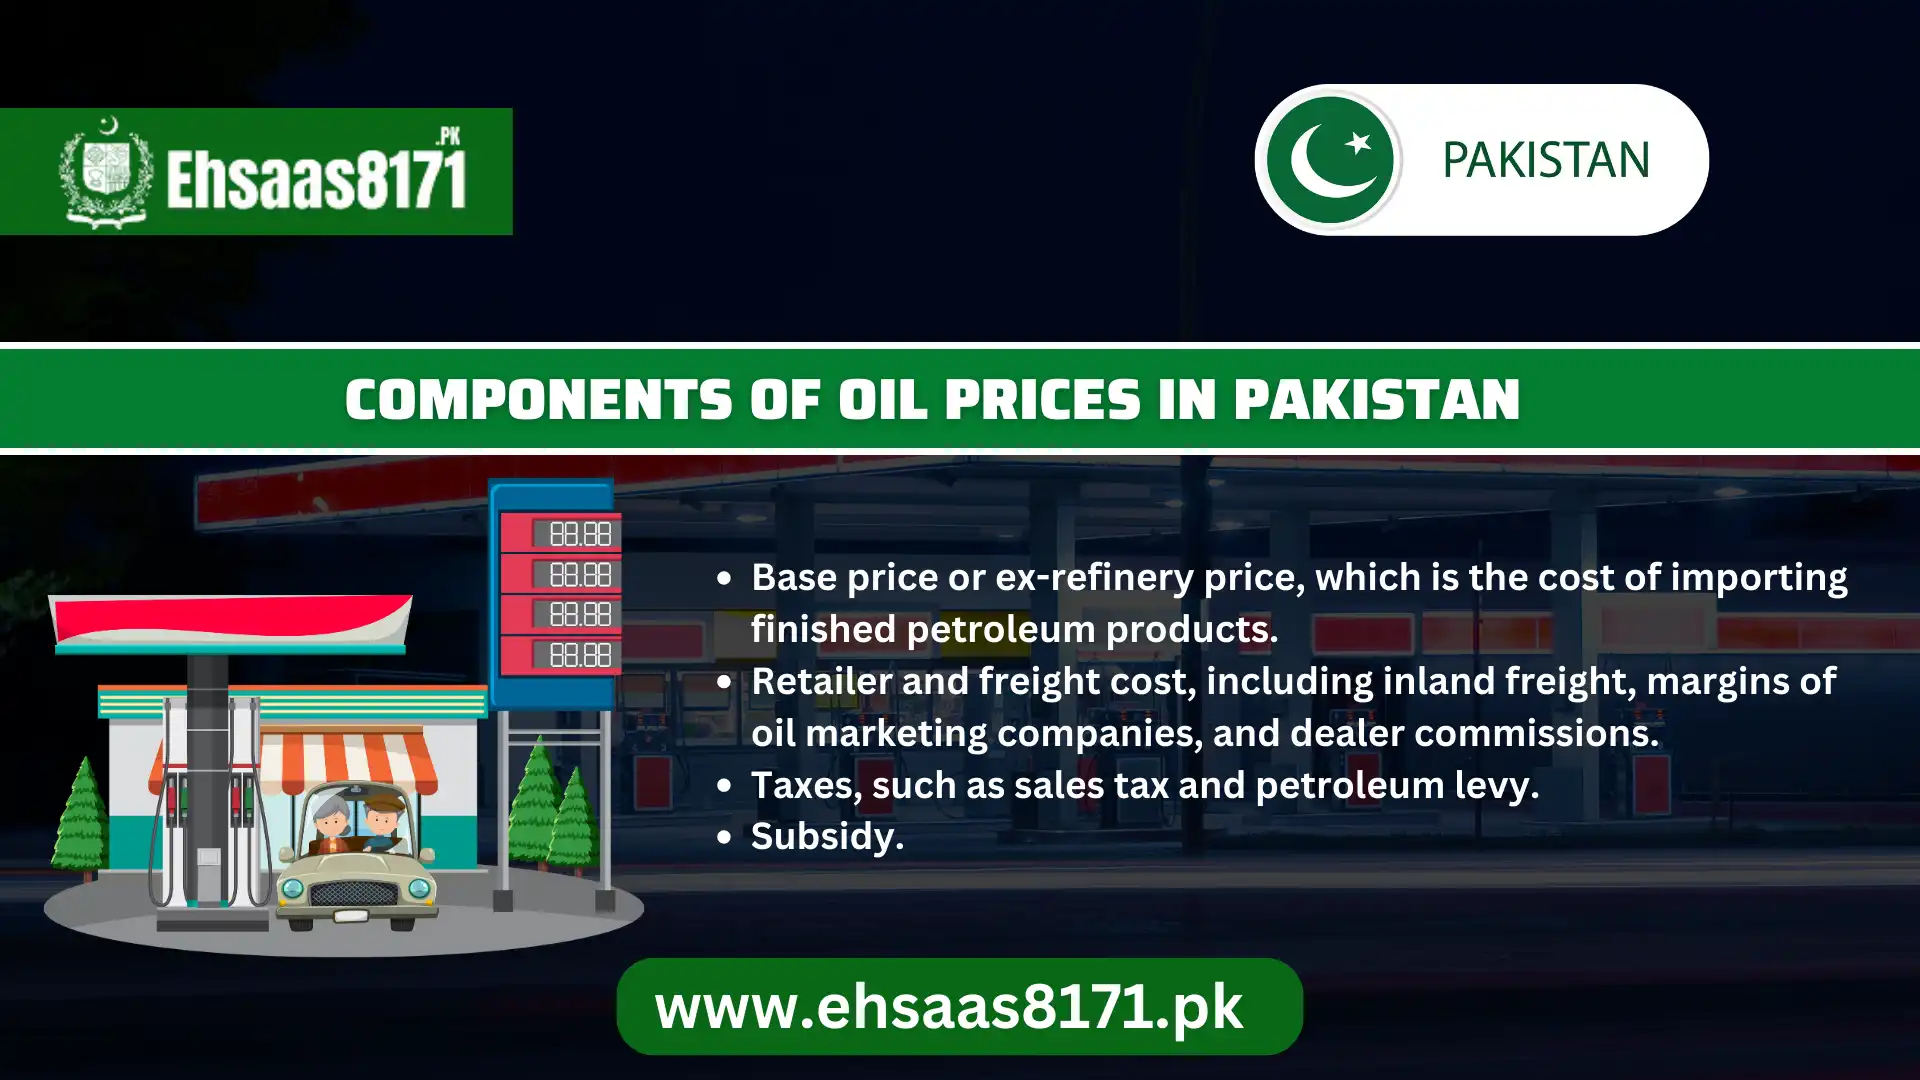 Components of Oil Prices in Pakistan